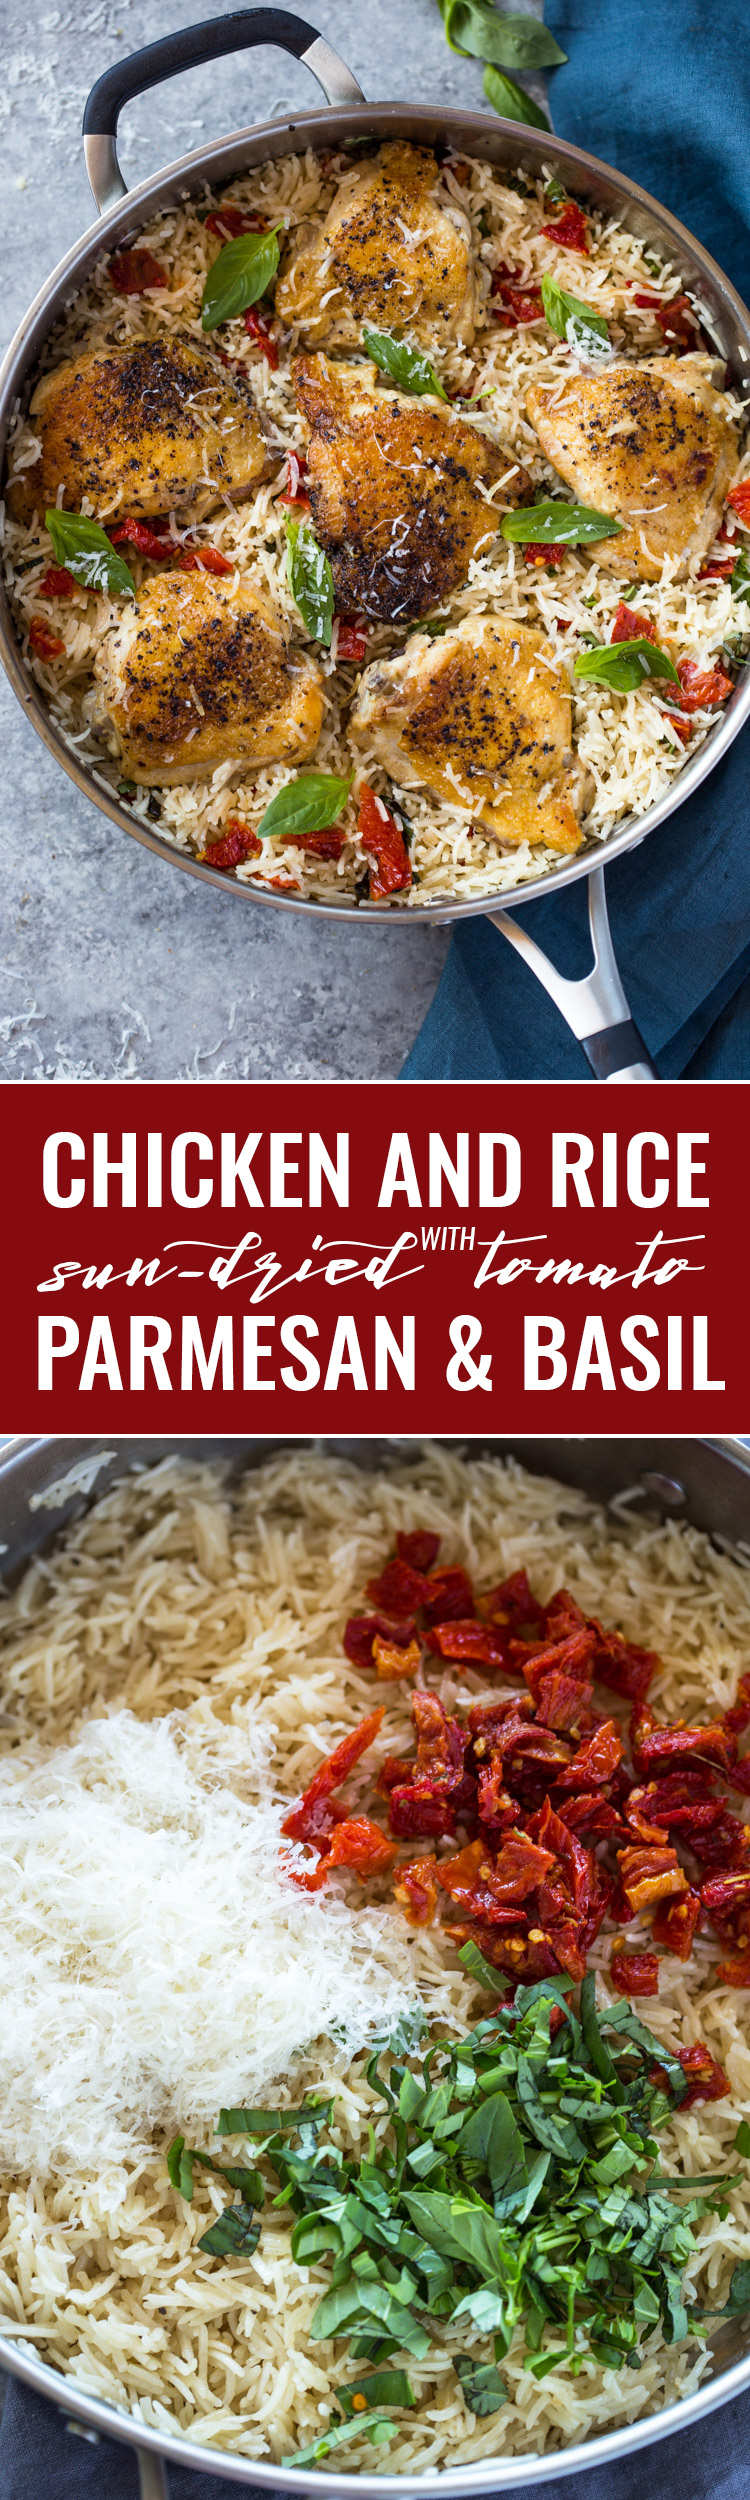 One Pan Chicken and Rice with Sun dried tomato, Parmesan and Basil